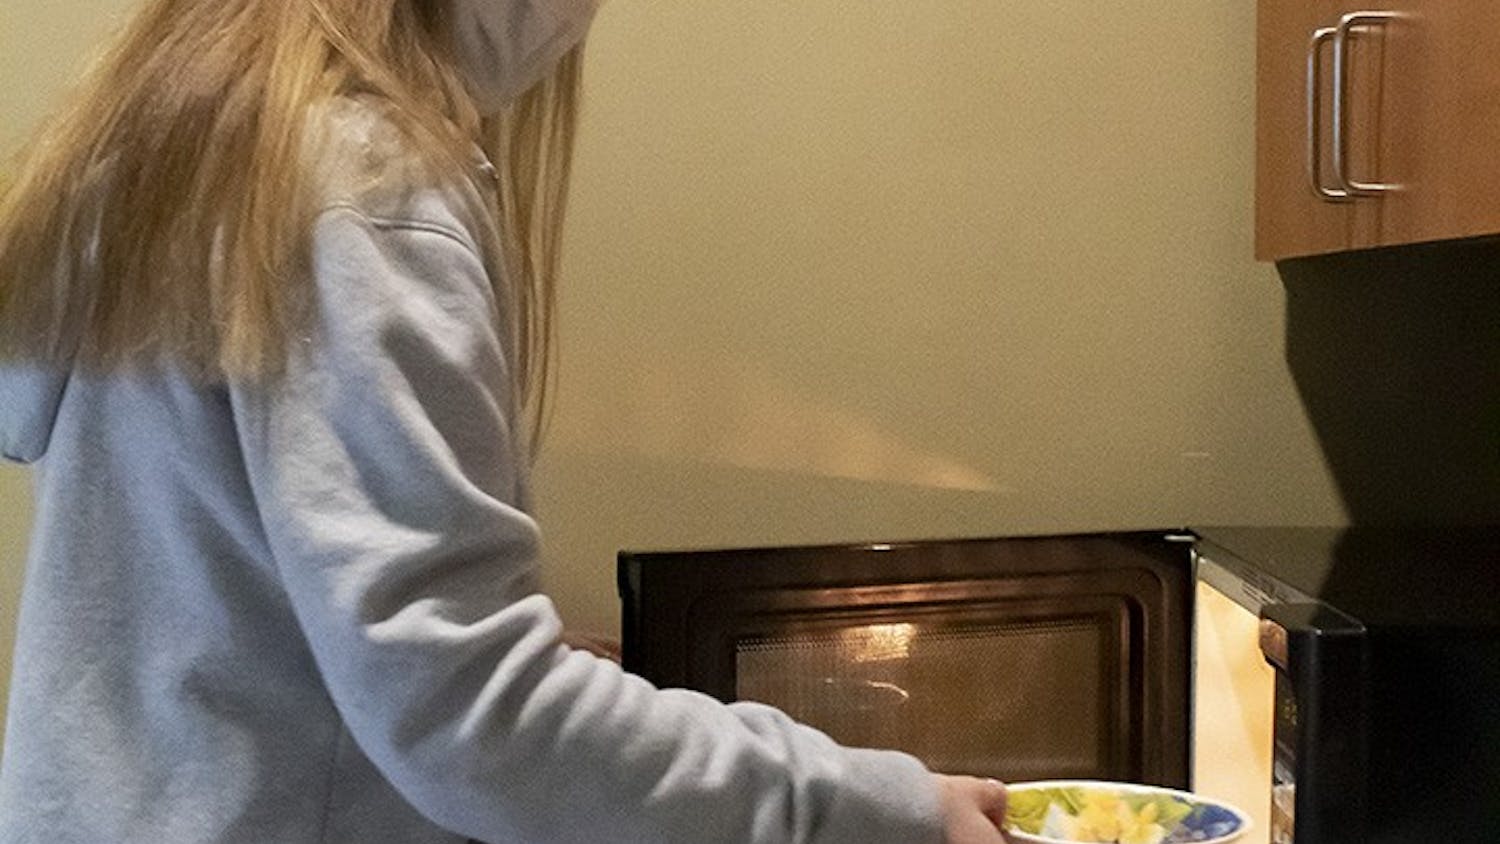 Second-year psychology student Gillian Porter puts a snack in the microwave at the Honors Residence Hall community kitchen.